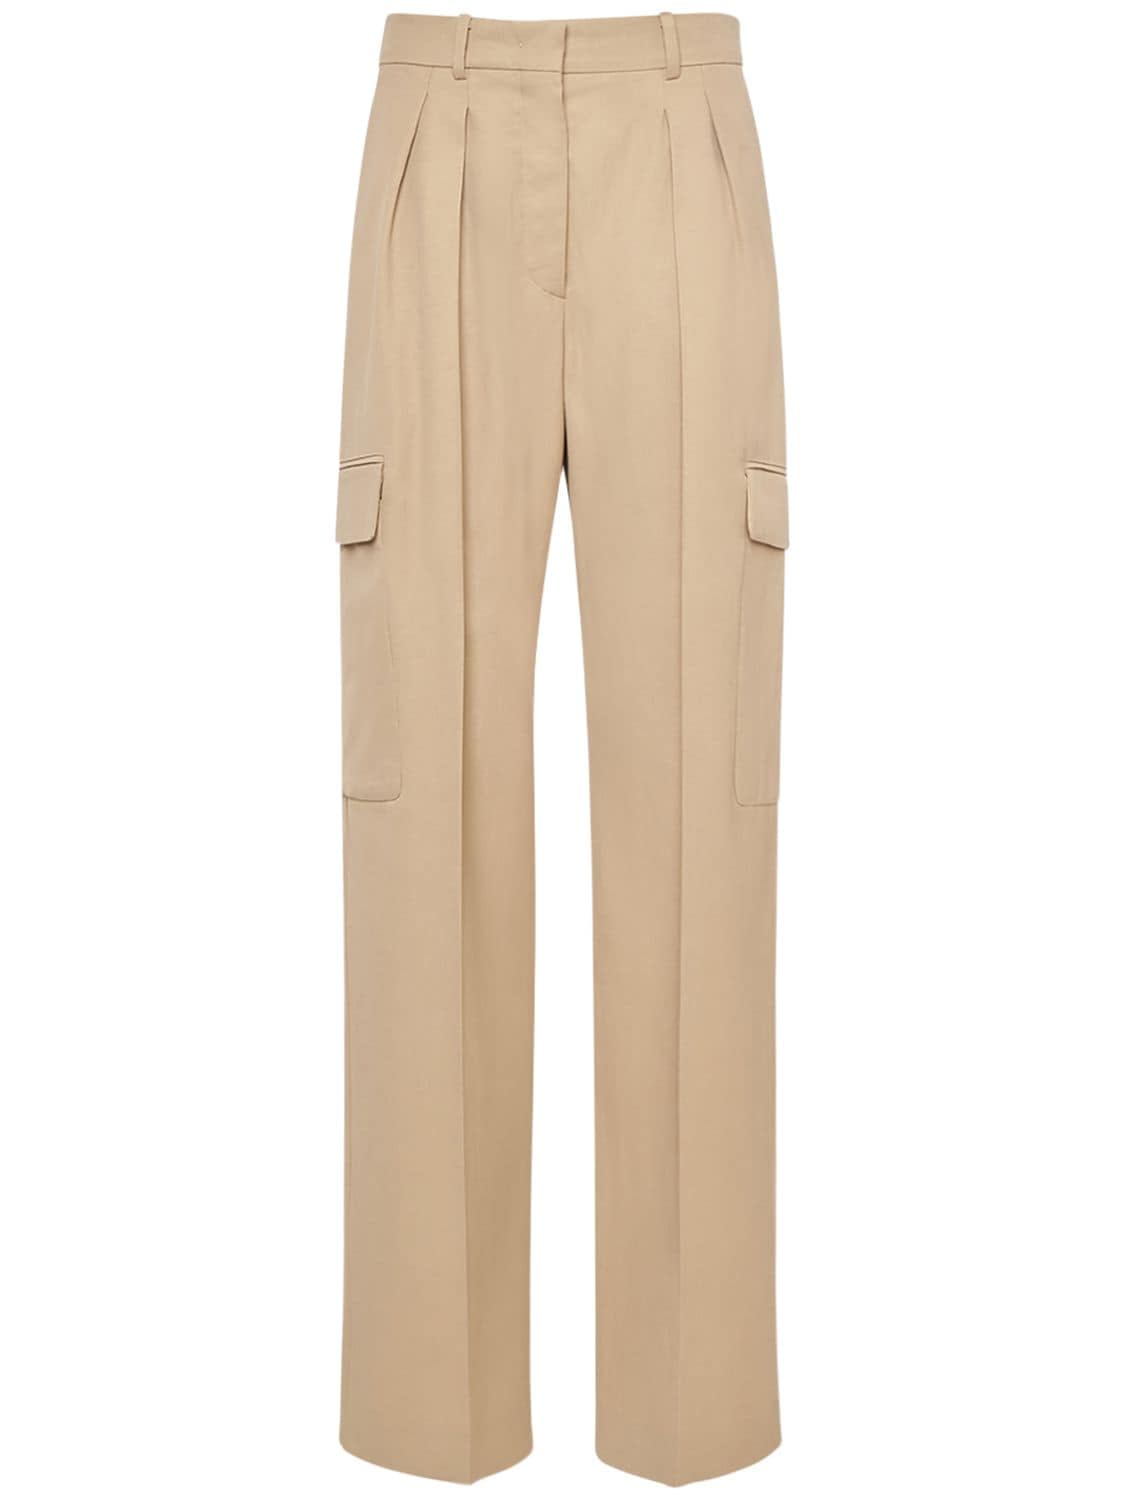 Image of Jacopo Cotton Blend Twill Cargo Pants